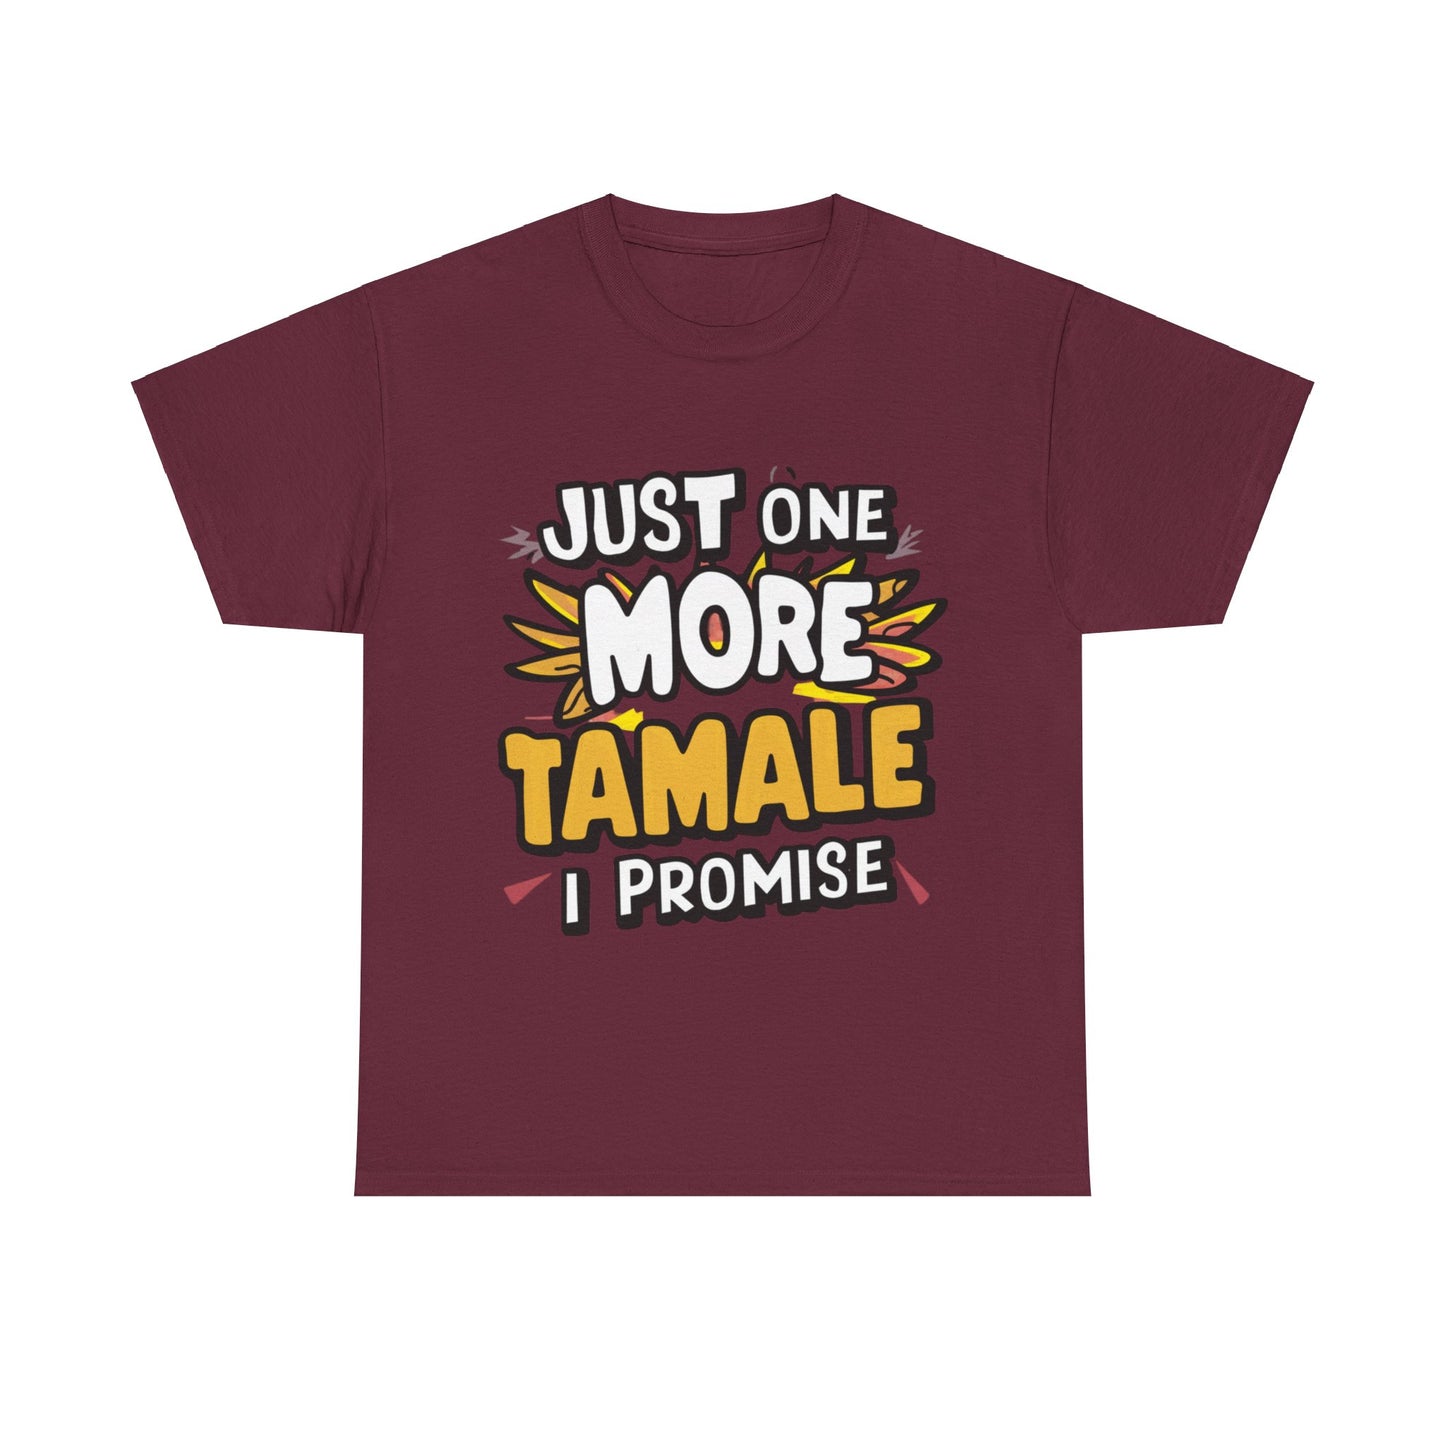 Just One More Tamale I Promise Mexican Food Graphic Unisex Heavy Cotton Tee Cotton Funny Humorous Graphic Soft Premium Unisex Men Women Maroon T-shirt Birthday Gift-5